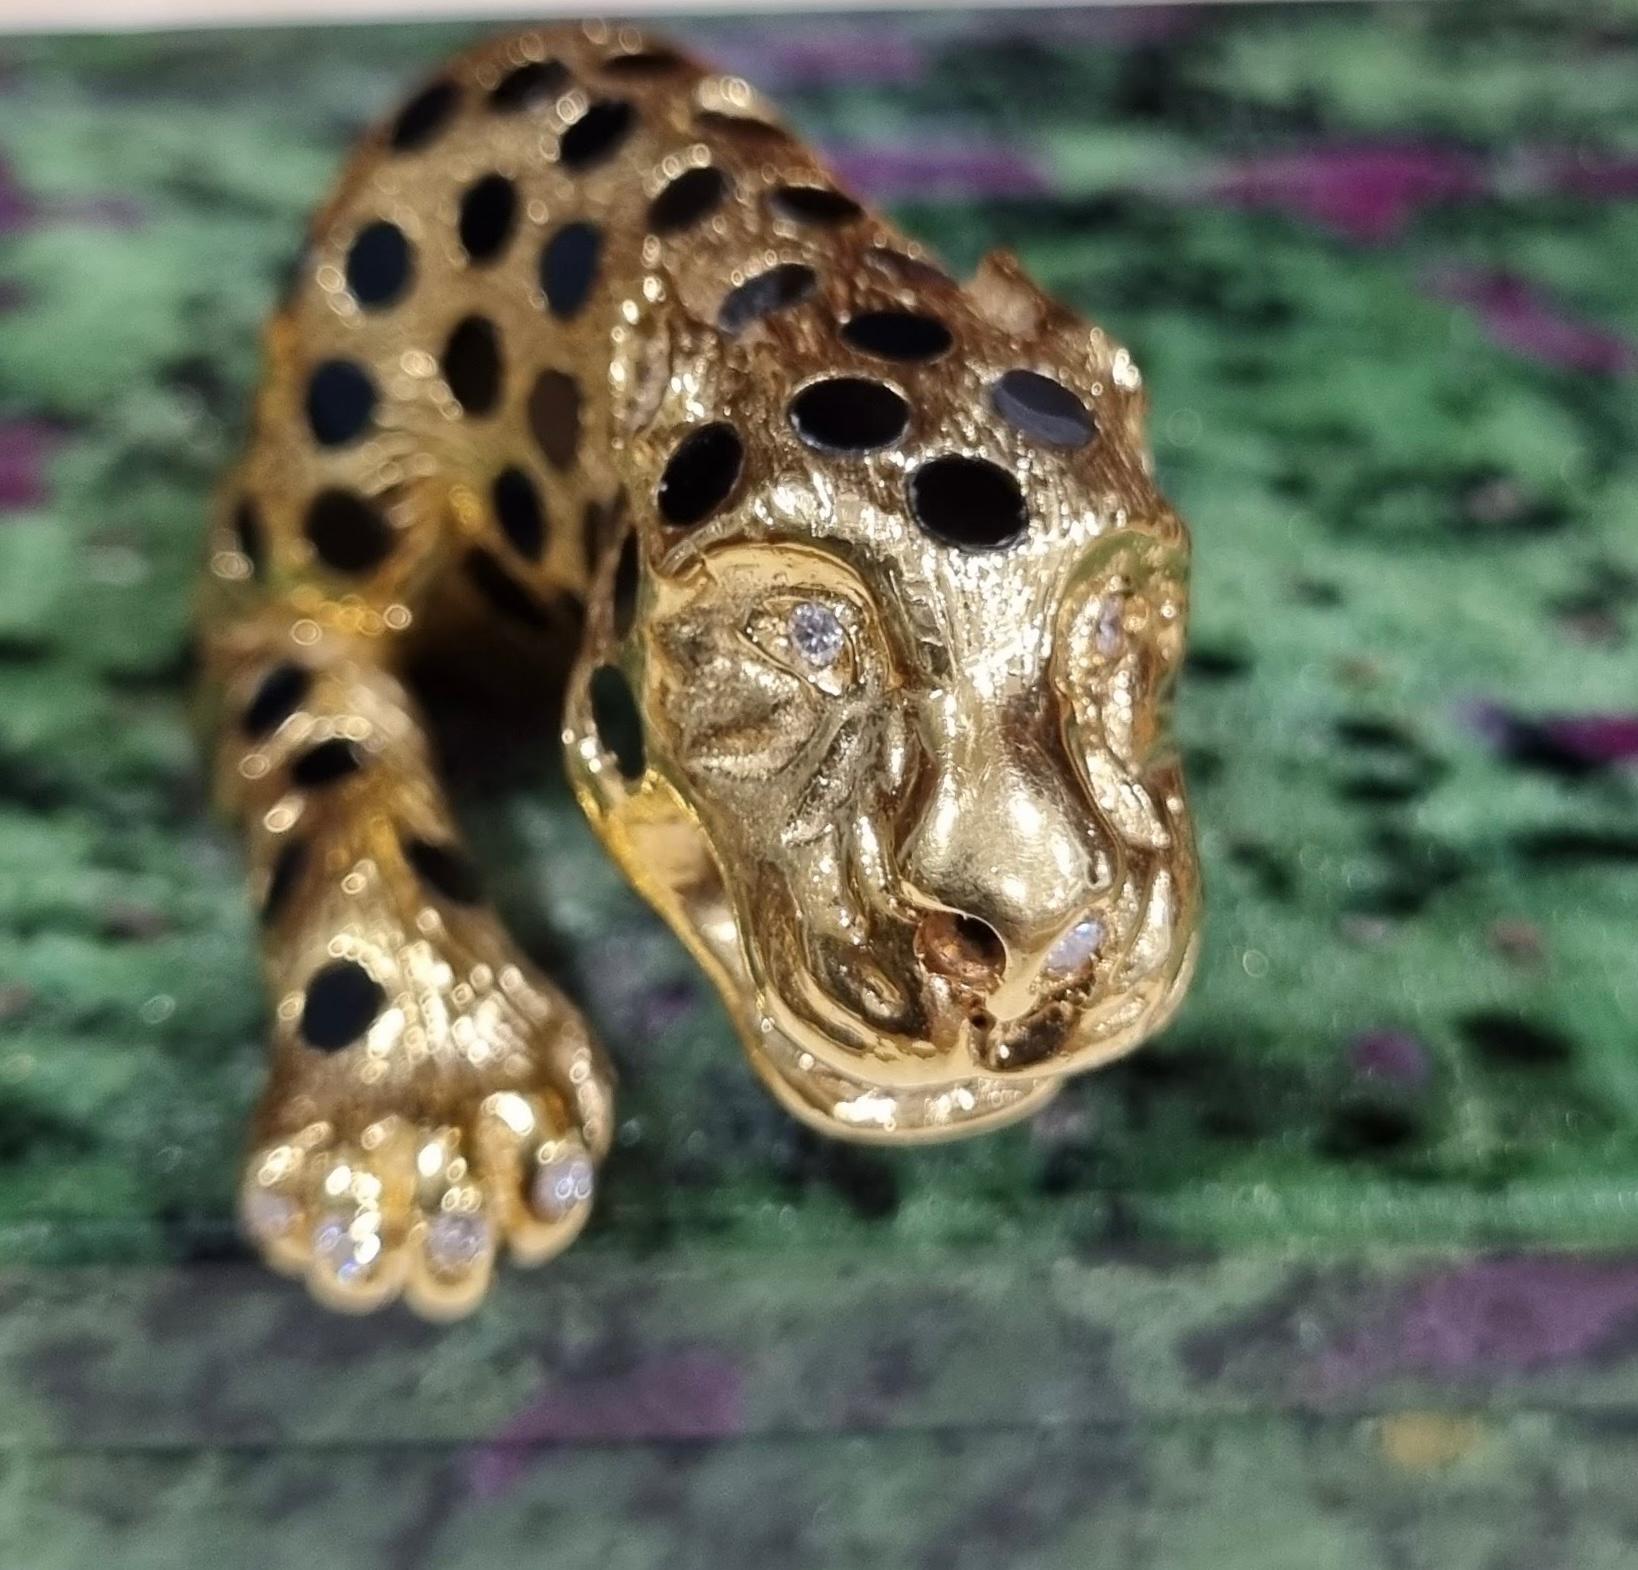 Gregory Gold & Onyx Panther in anyolite rubi jewelry box In Excellent Condition For Sale In Bilbao, ES